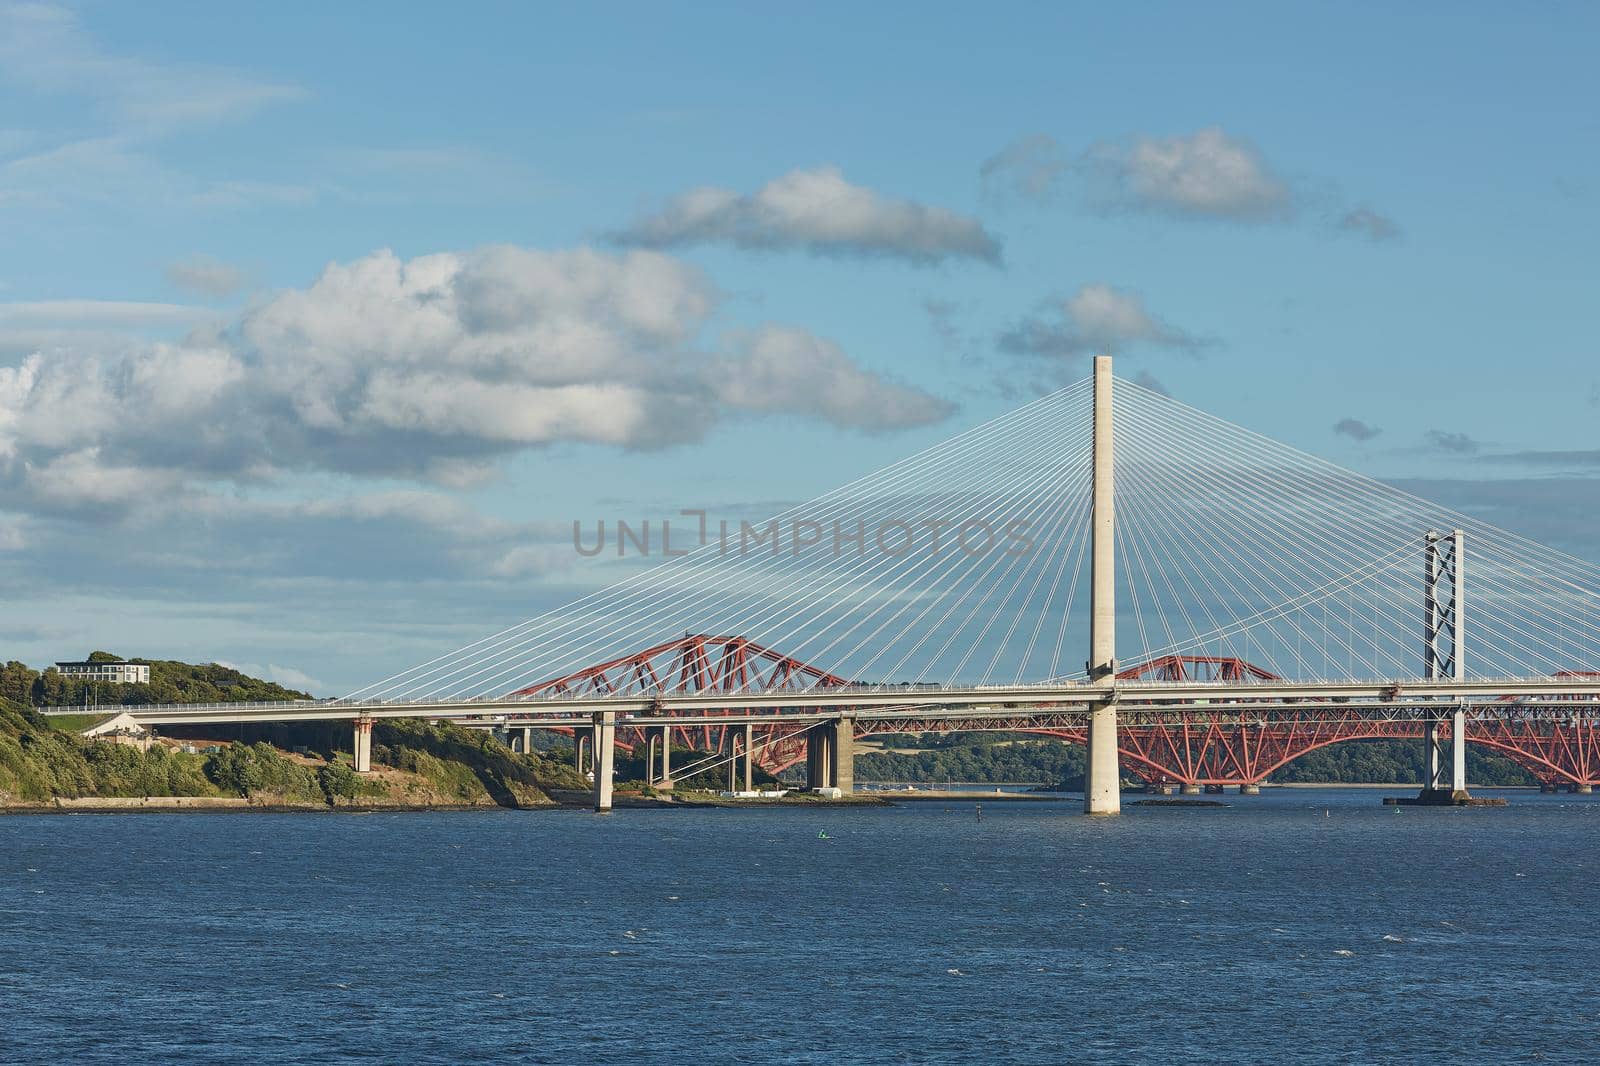 The new Queensferry Crossing bridge over the Firth of Forth with the older Forth Road bridge and the iconic Forth Rail Bridge in Edinburgh Scotland